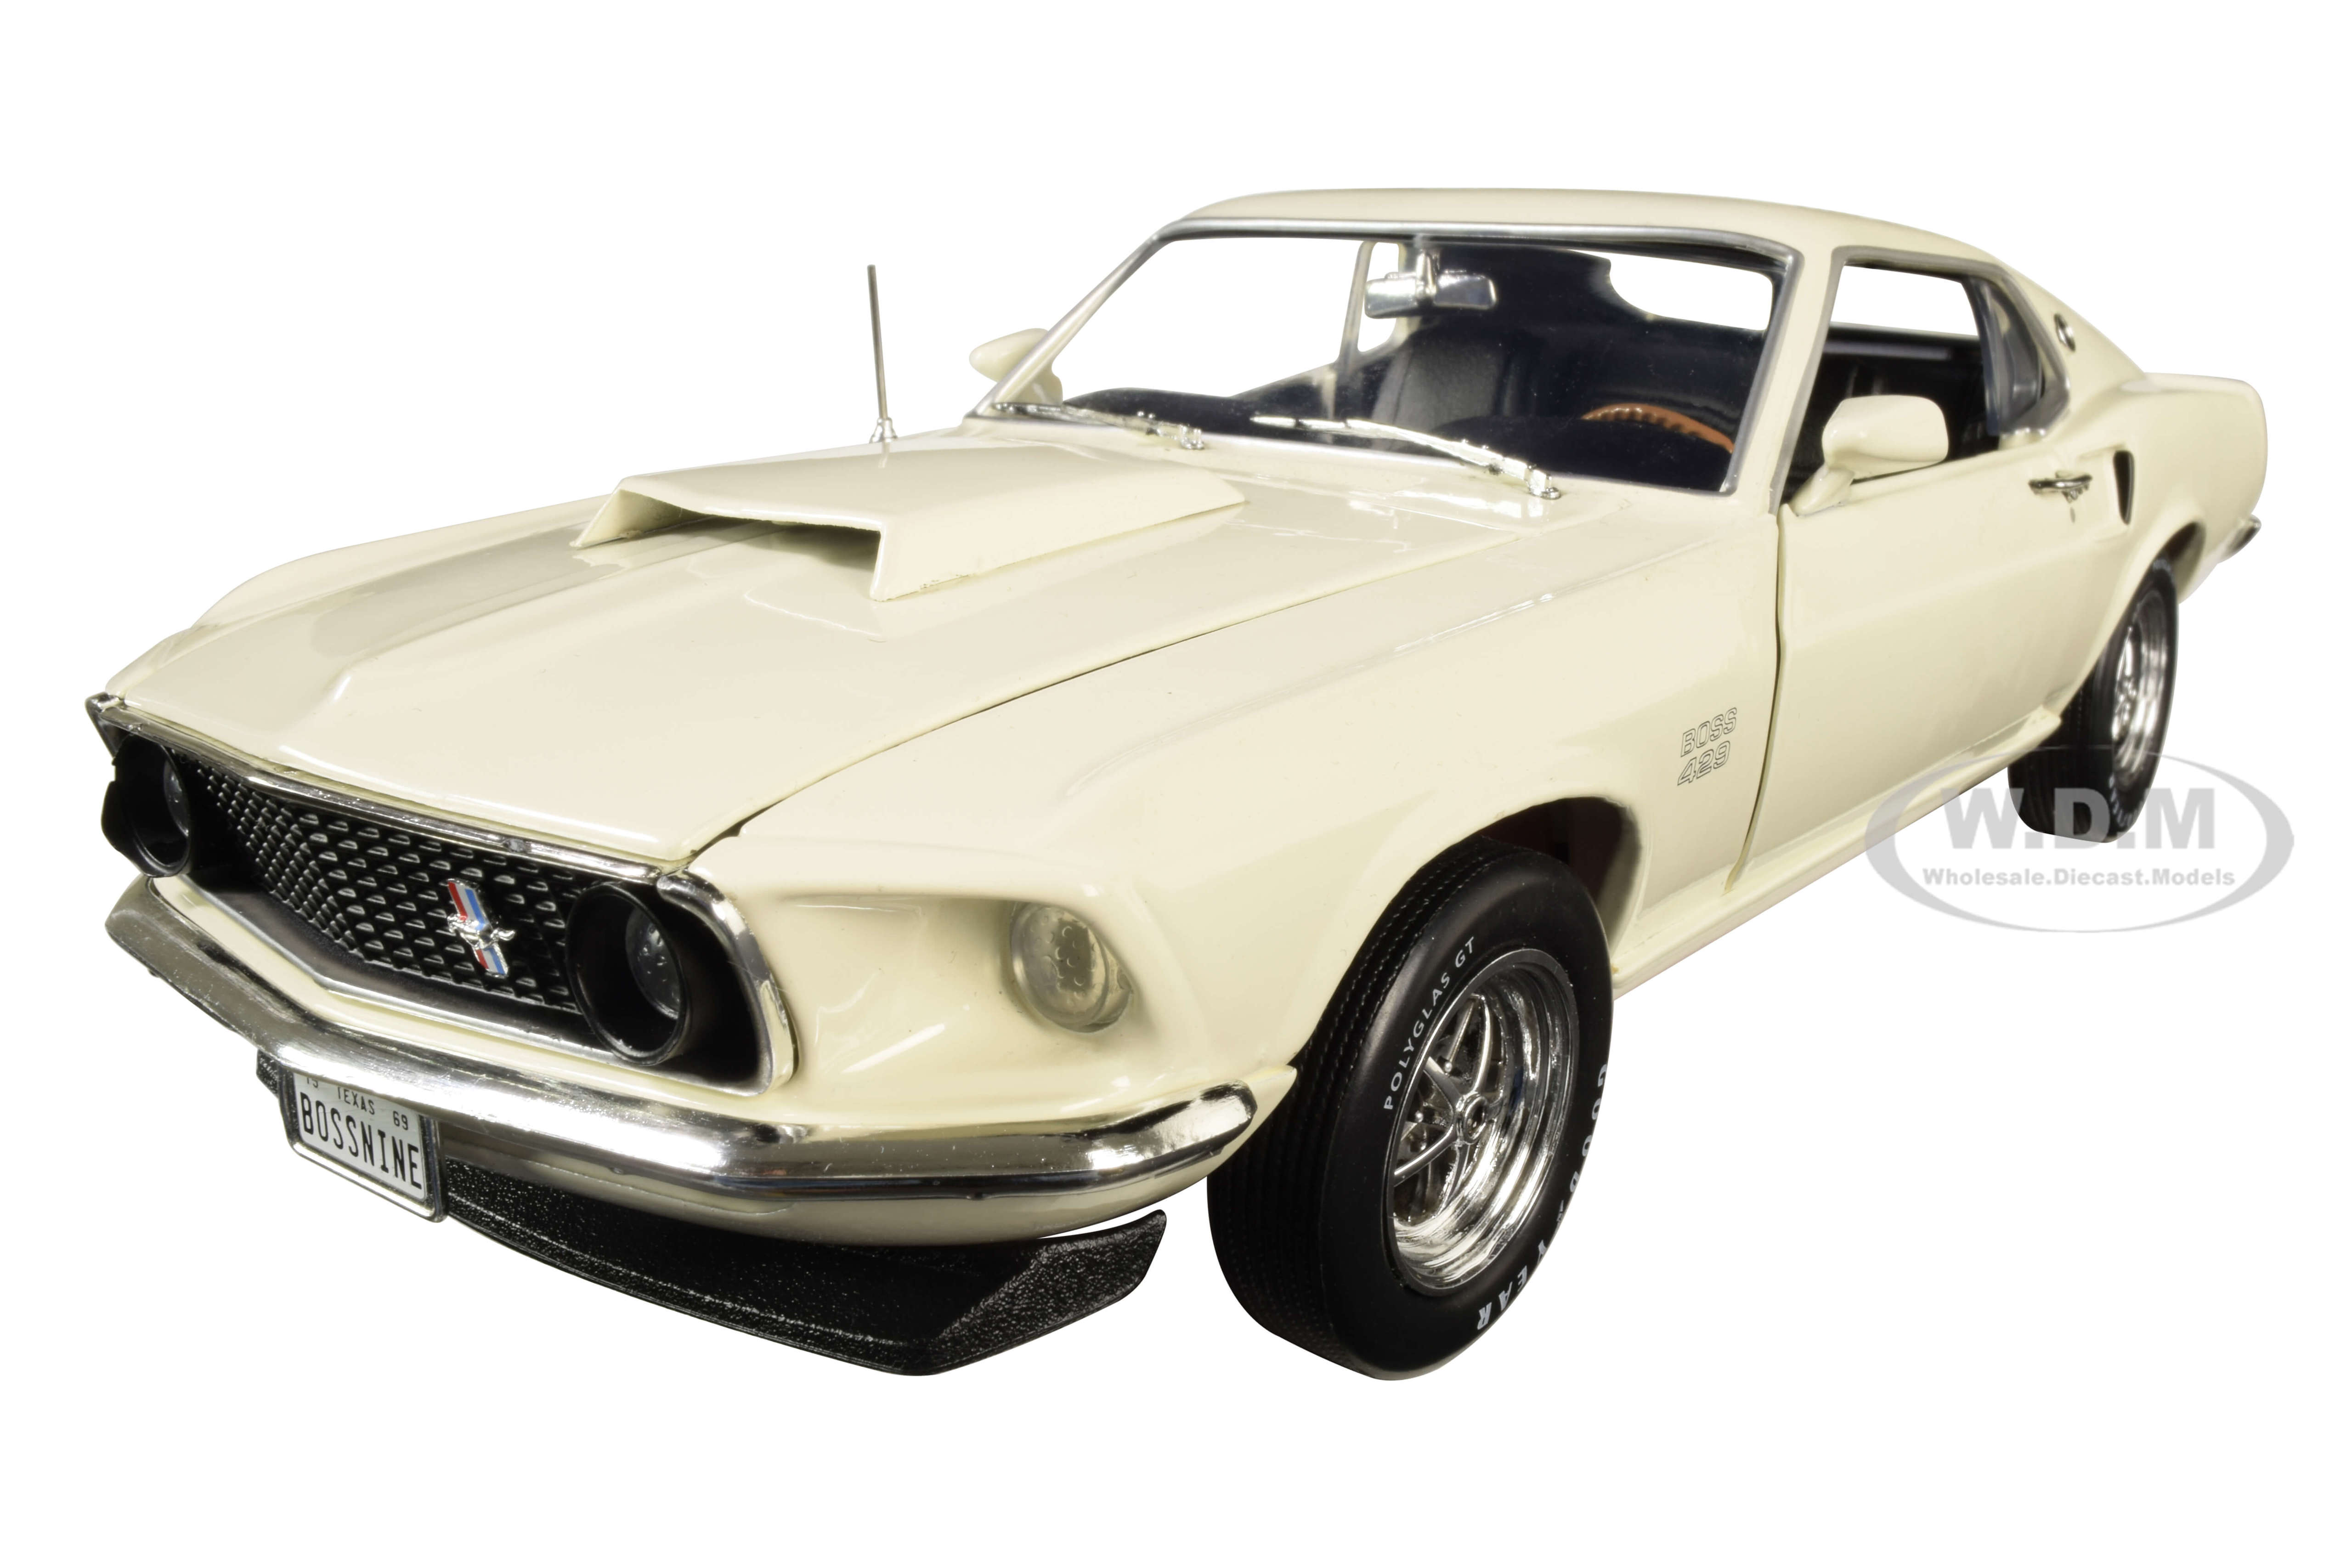 1969 Ford Mustang Fastback Boss 429 Wimbledon White "class Of 1969" "50th Anniversary Of The Boss Engines" (1969-2019) 1/18 Diecast Model Car By Auto